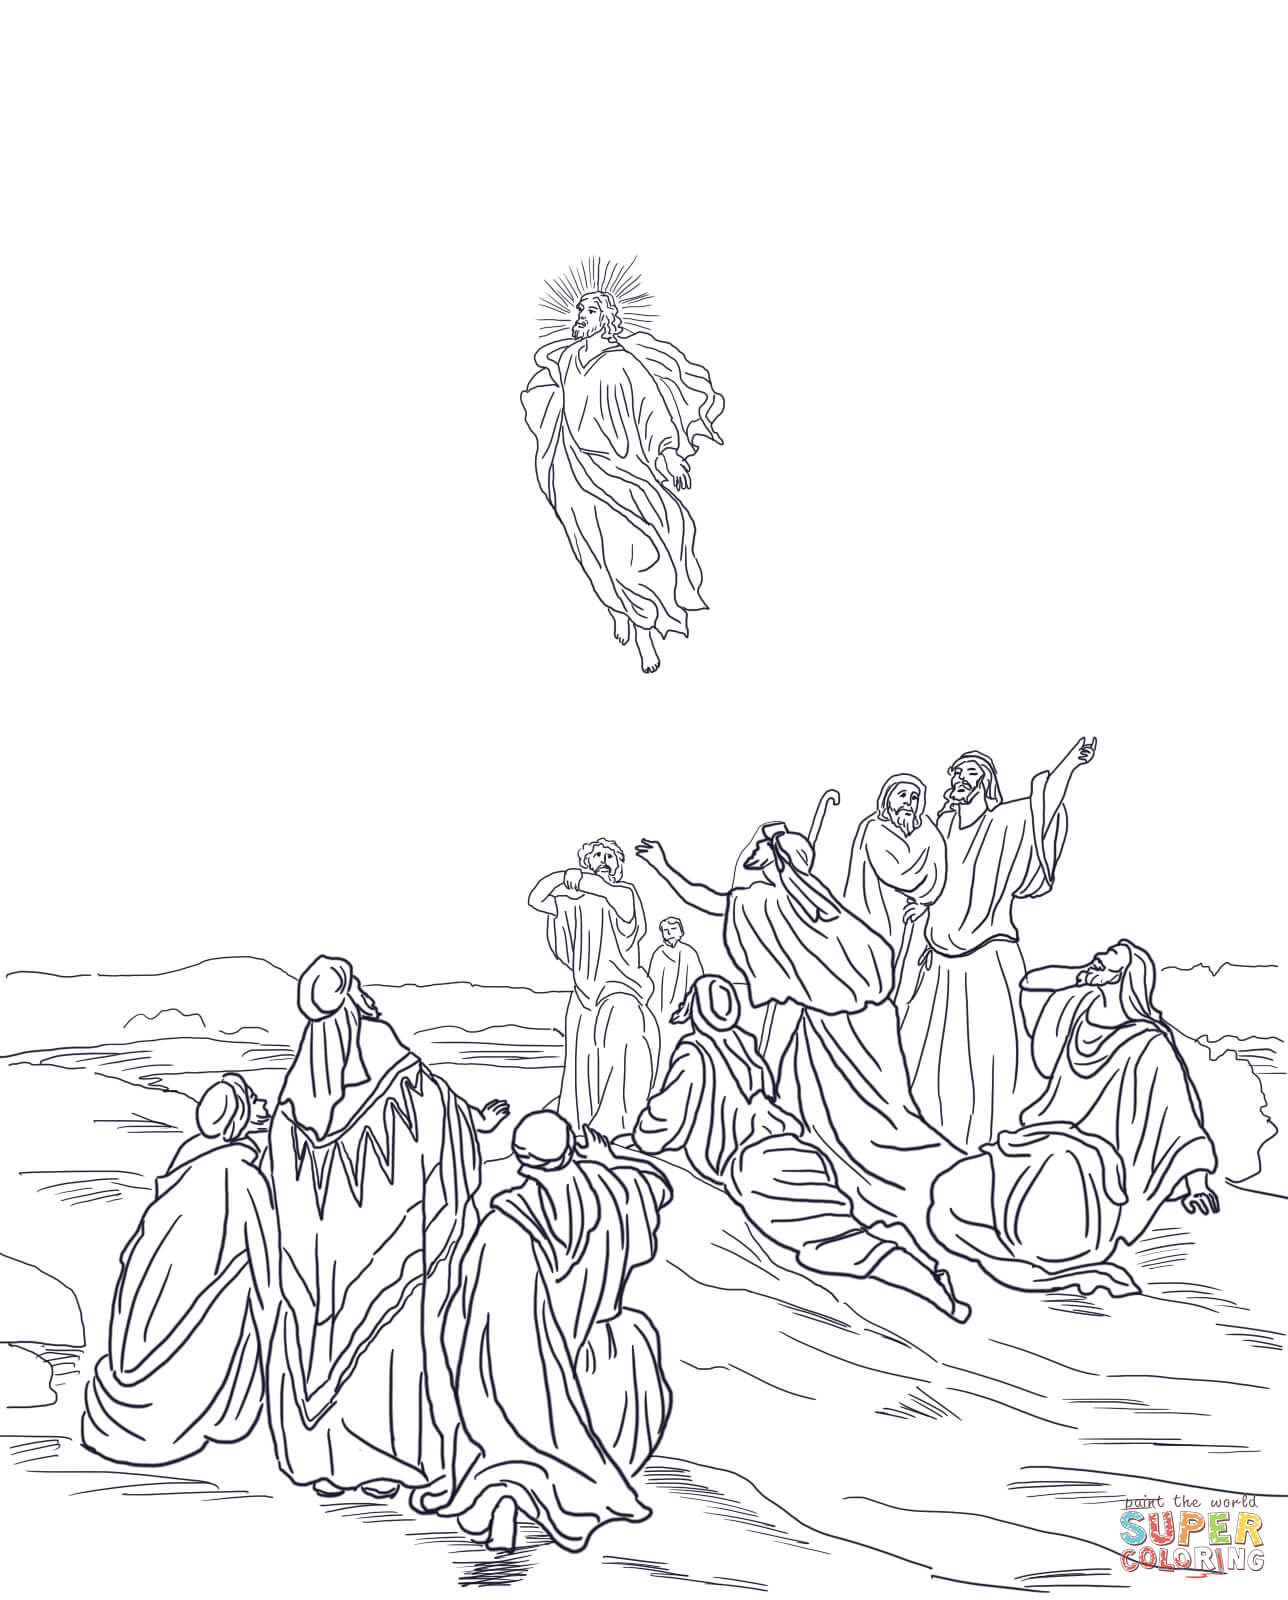 Free Ascension Coloring Page Download Free Ascension Coloring Page Png